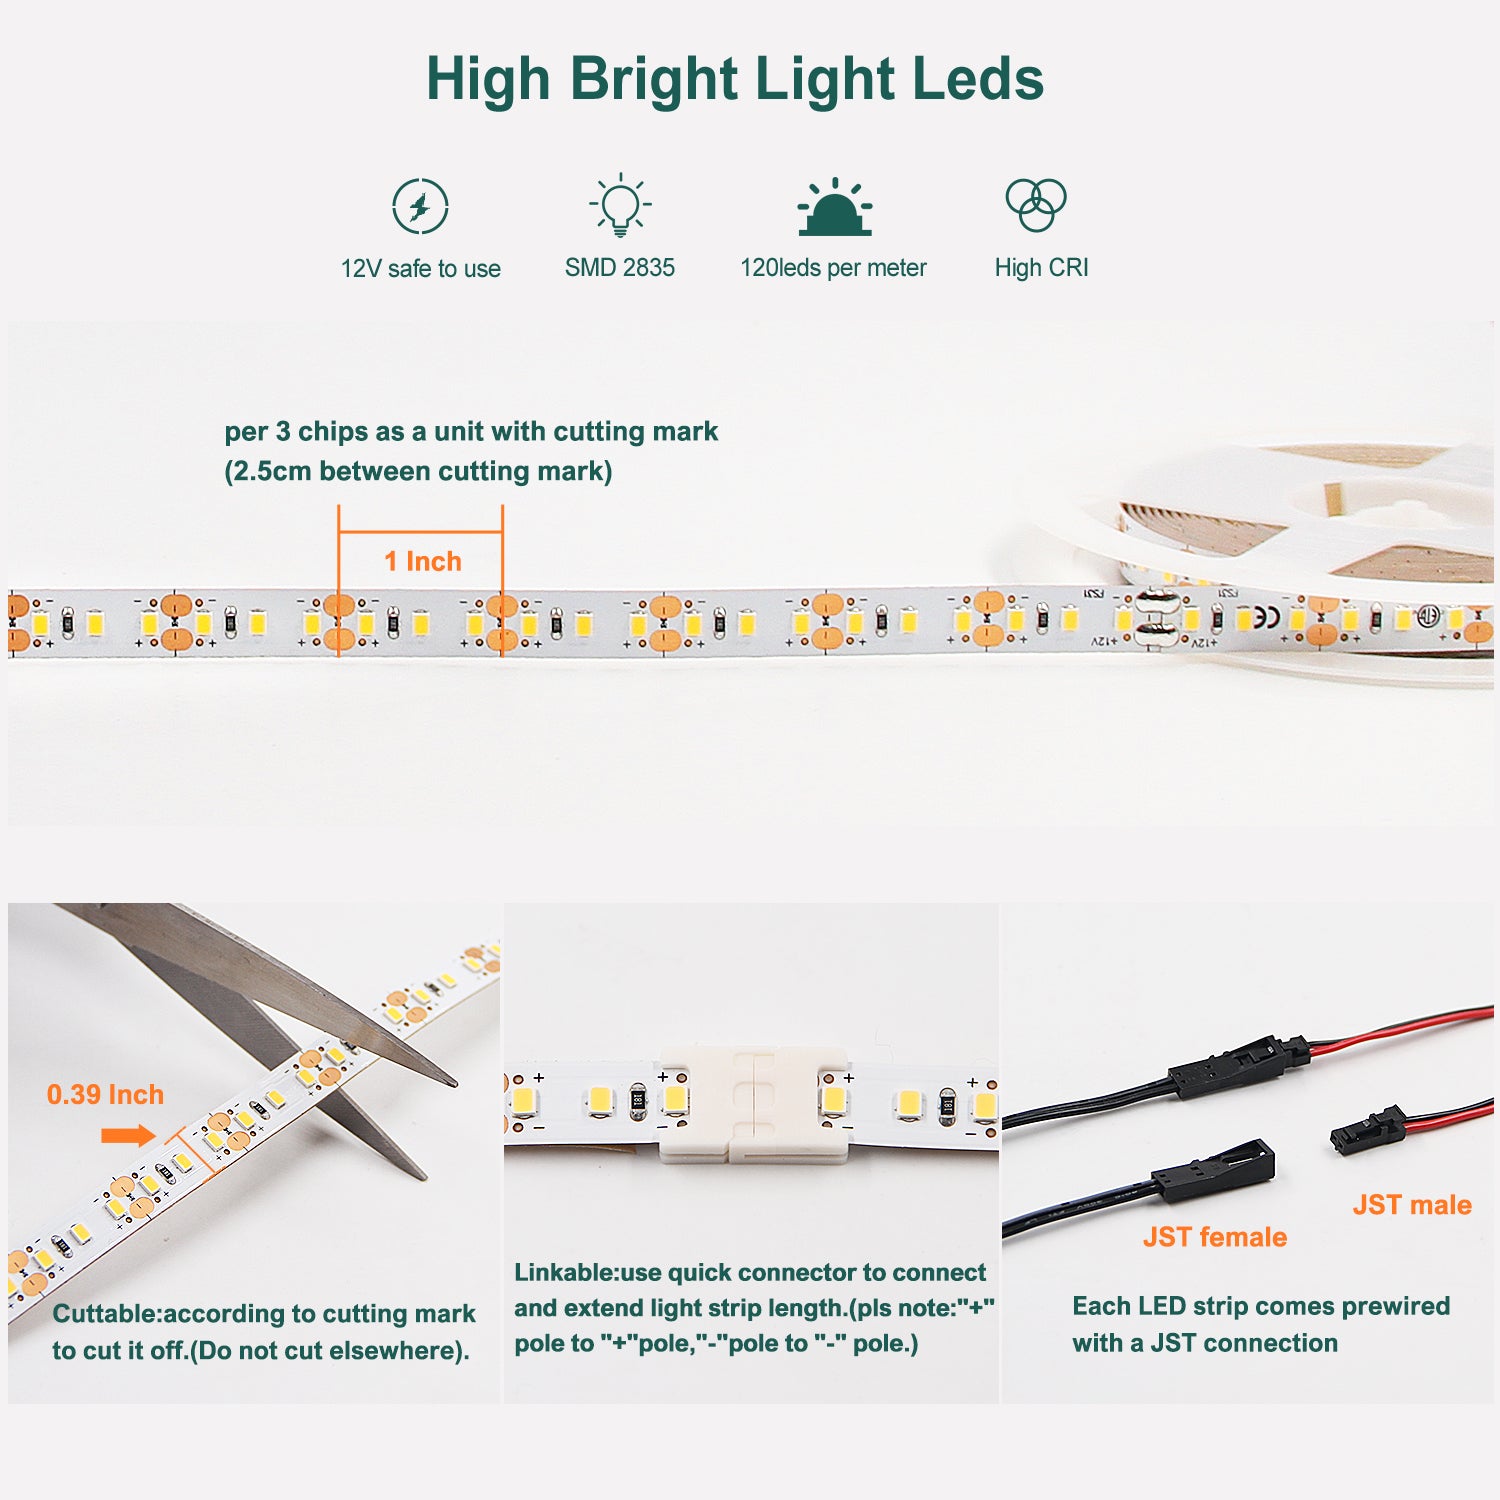 Send inquiry for 12V Long LED Light Strips  Cuttable LED Tape Light with CE to high quality Long LED Light Strips supplier. WholesaleCuttable LED Tape Light directly from China Long LED Light Strips manufacturers/exporters. Get a factory sale price list and become a distributor/agent-vstled.com